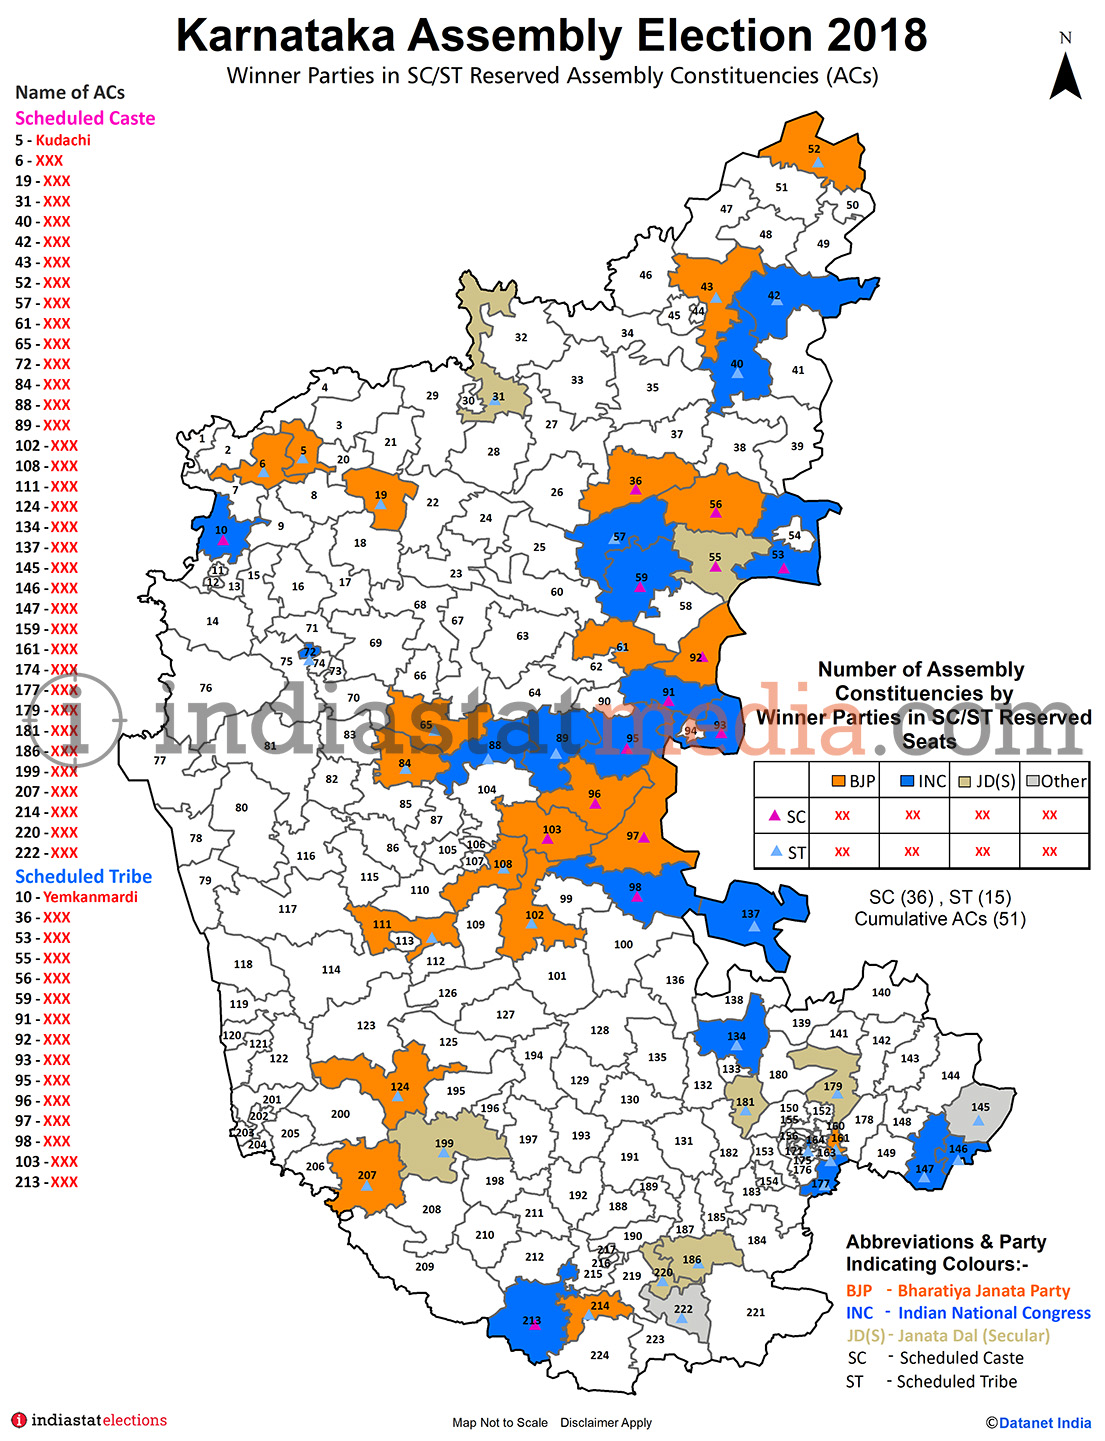 Winner Parties in Scheduled Caste (SC)/Scheduled Tribe (ST) Reserved Assembly Constituencies in Karnataka Assembly Election - 2018